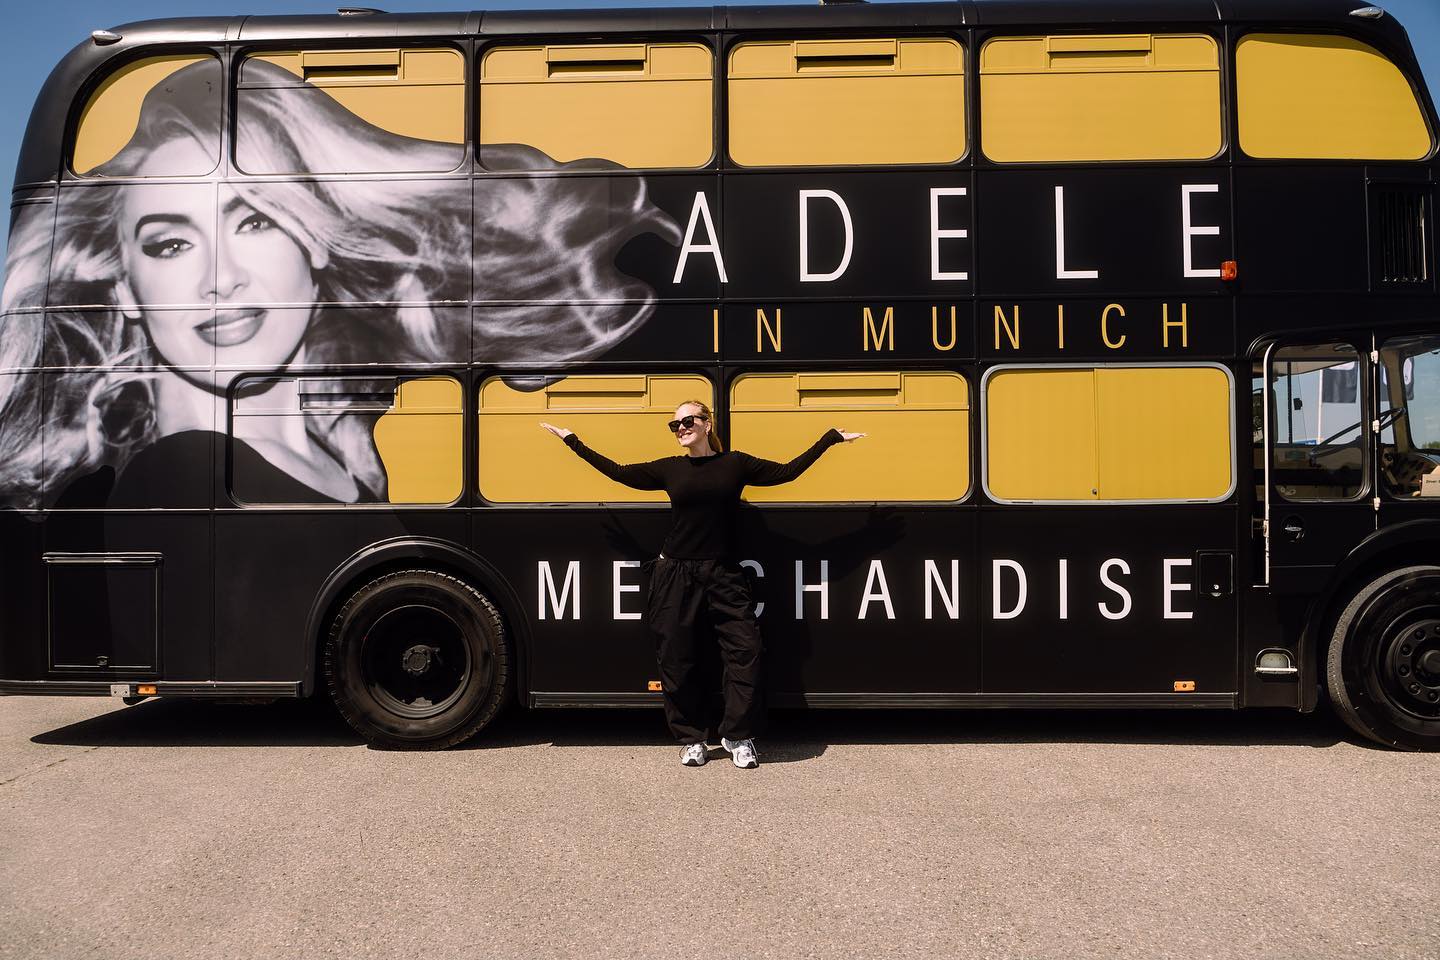 Adele will be using her tour bus to escape the city during her residency